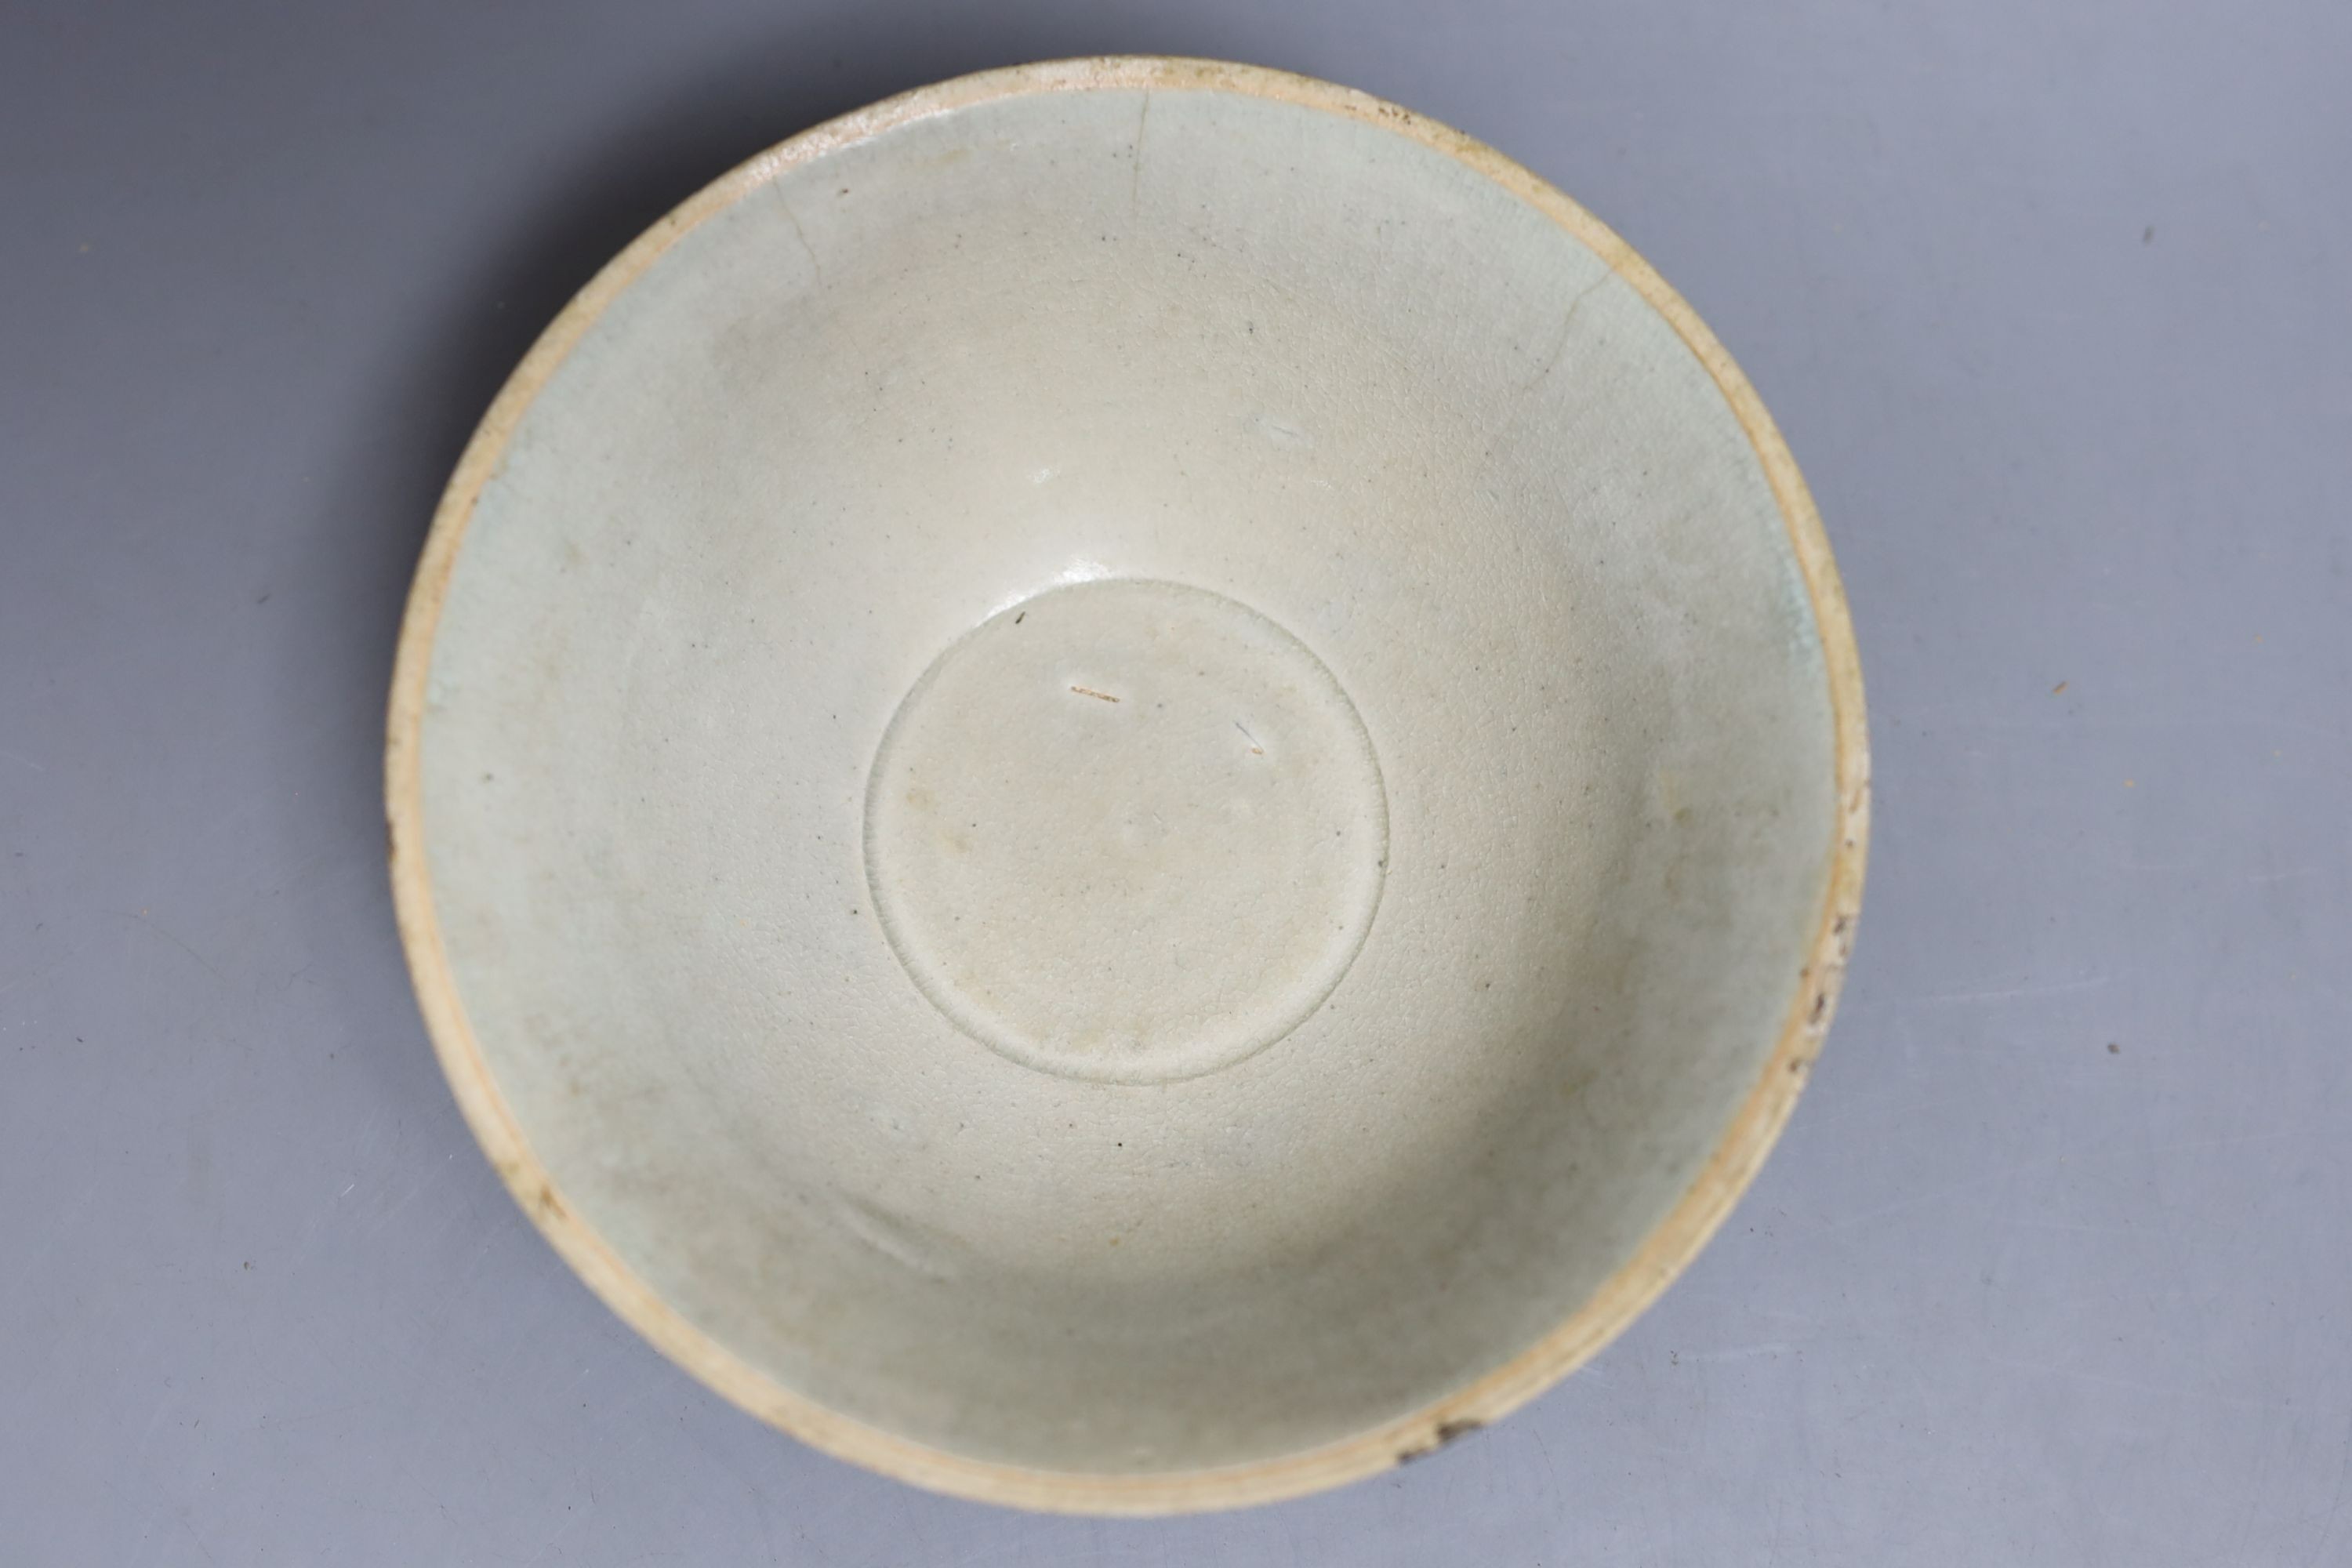 A Chinese Qingbai bowl and a Ge ware type shell dish, Yuan dynasty or later. Largest 18cm diameter